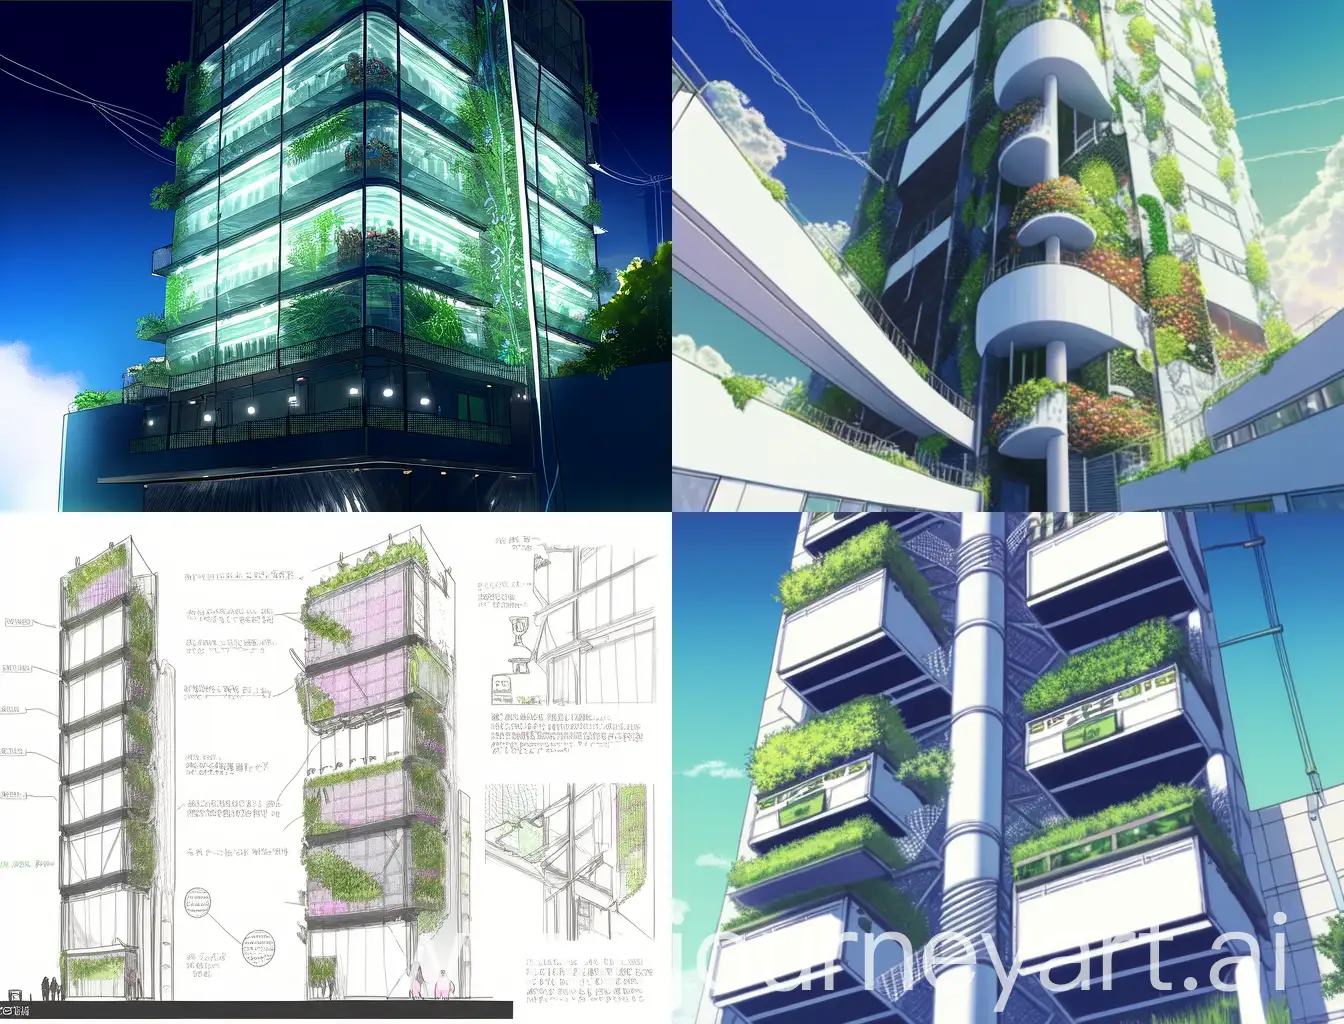 draw vertical hydroponic tower on building facade